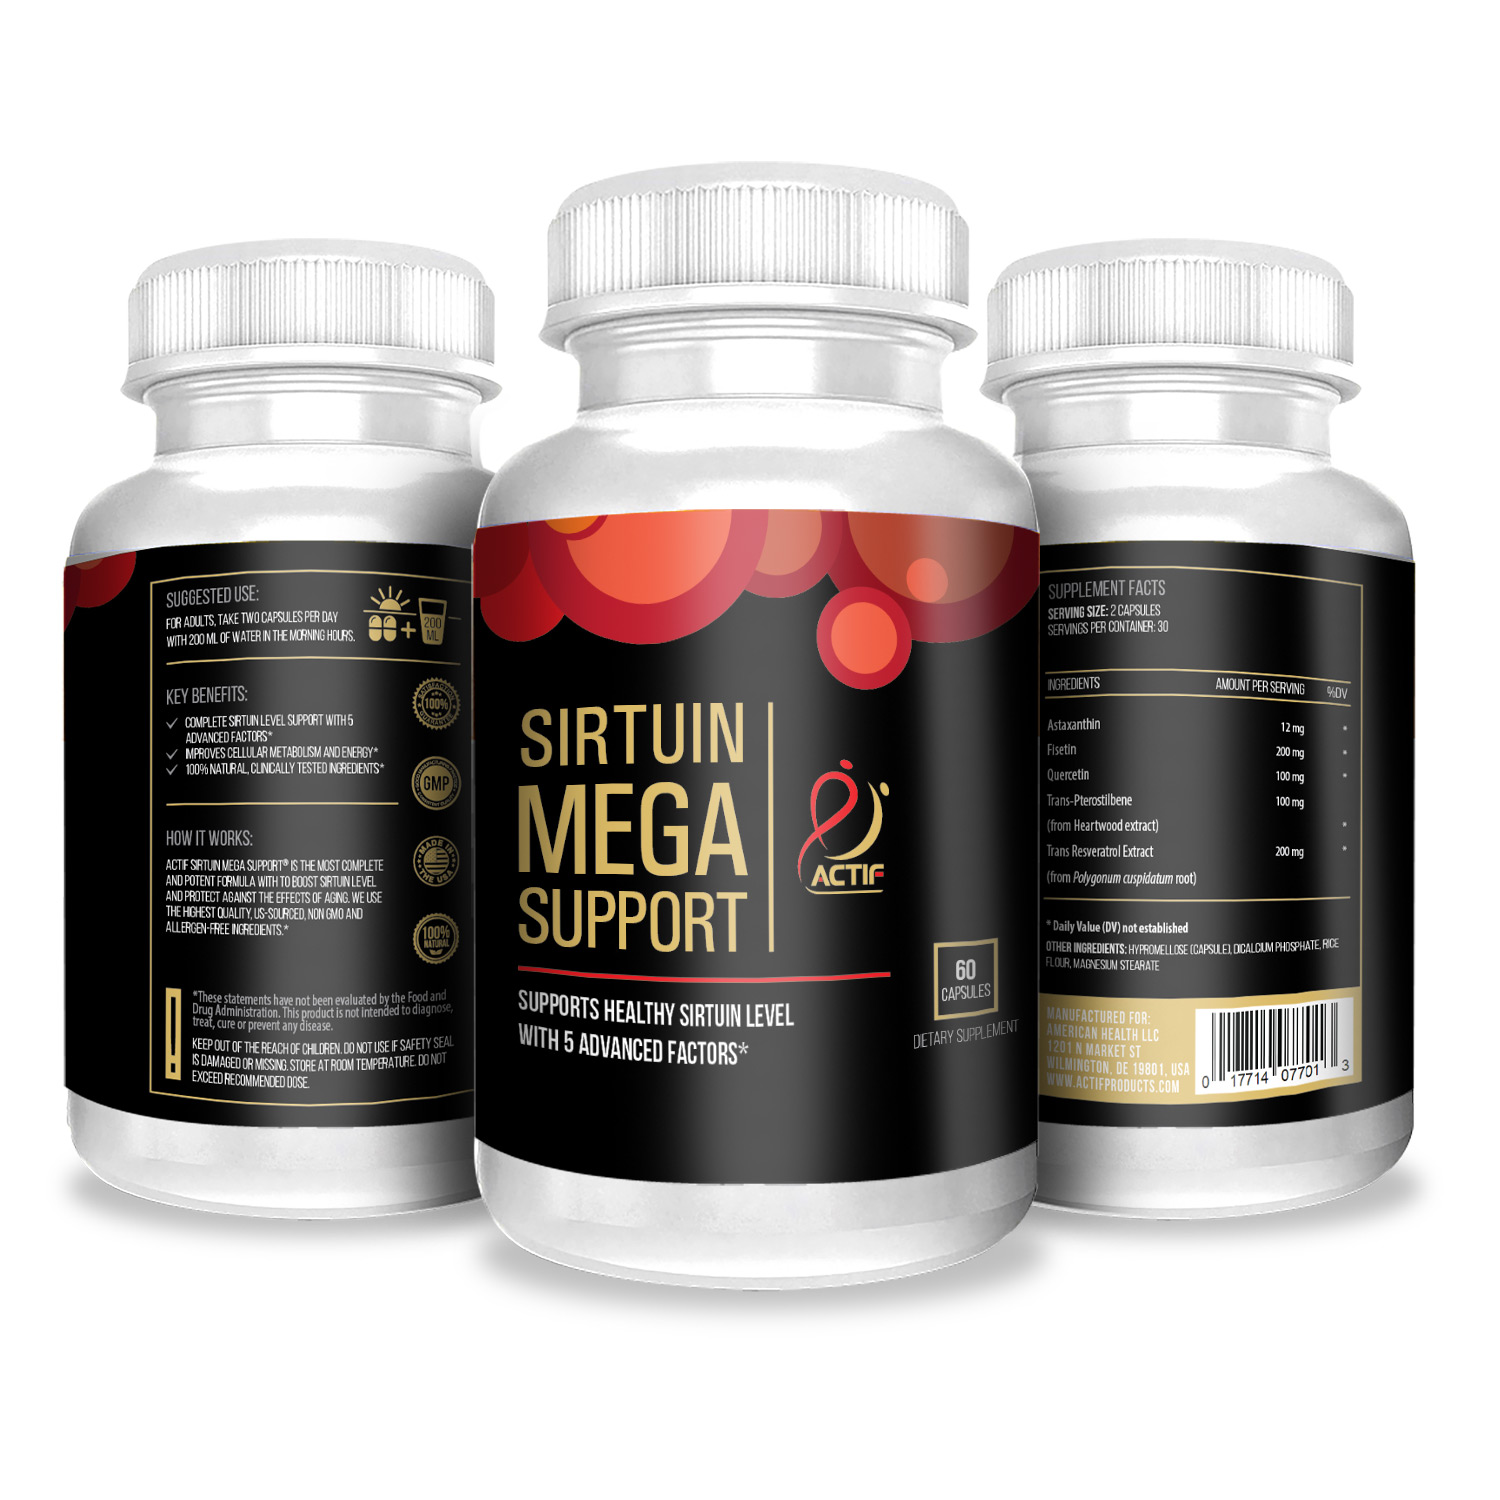 Actif Sirtuin Mega Support With 5 Advanced Factors – Anti-Aging 